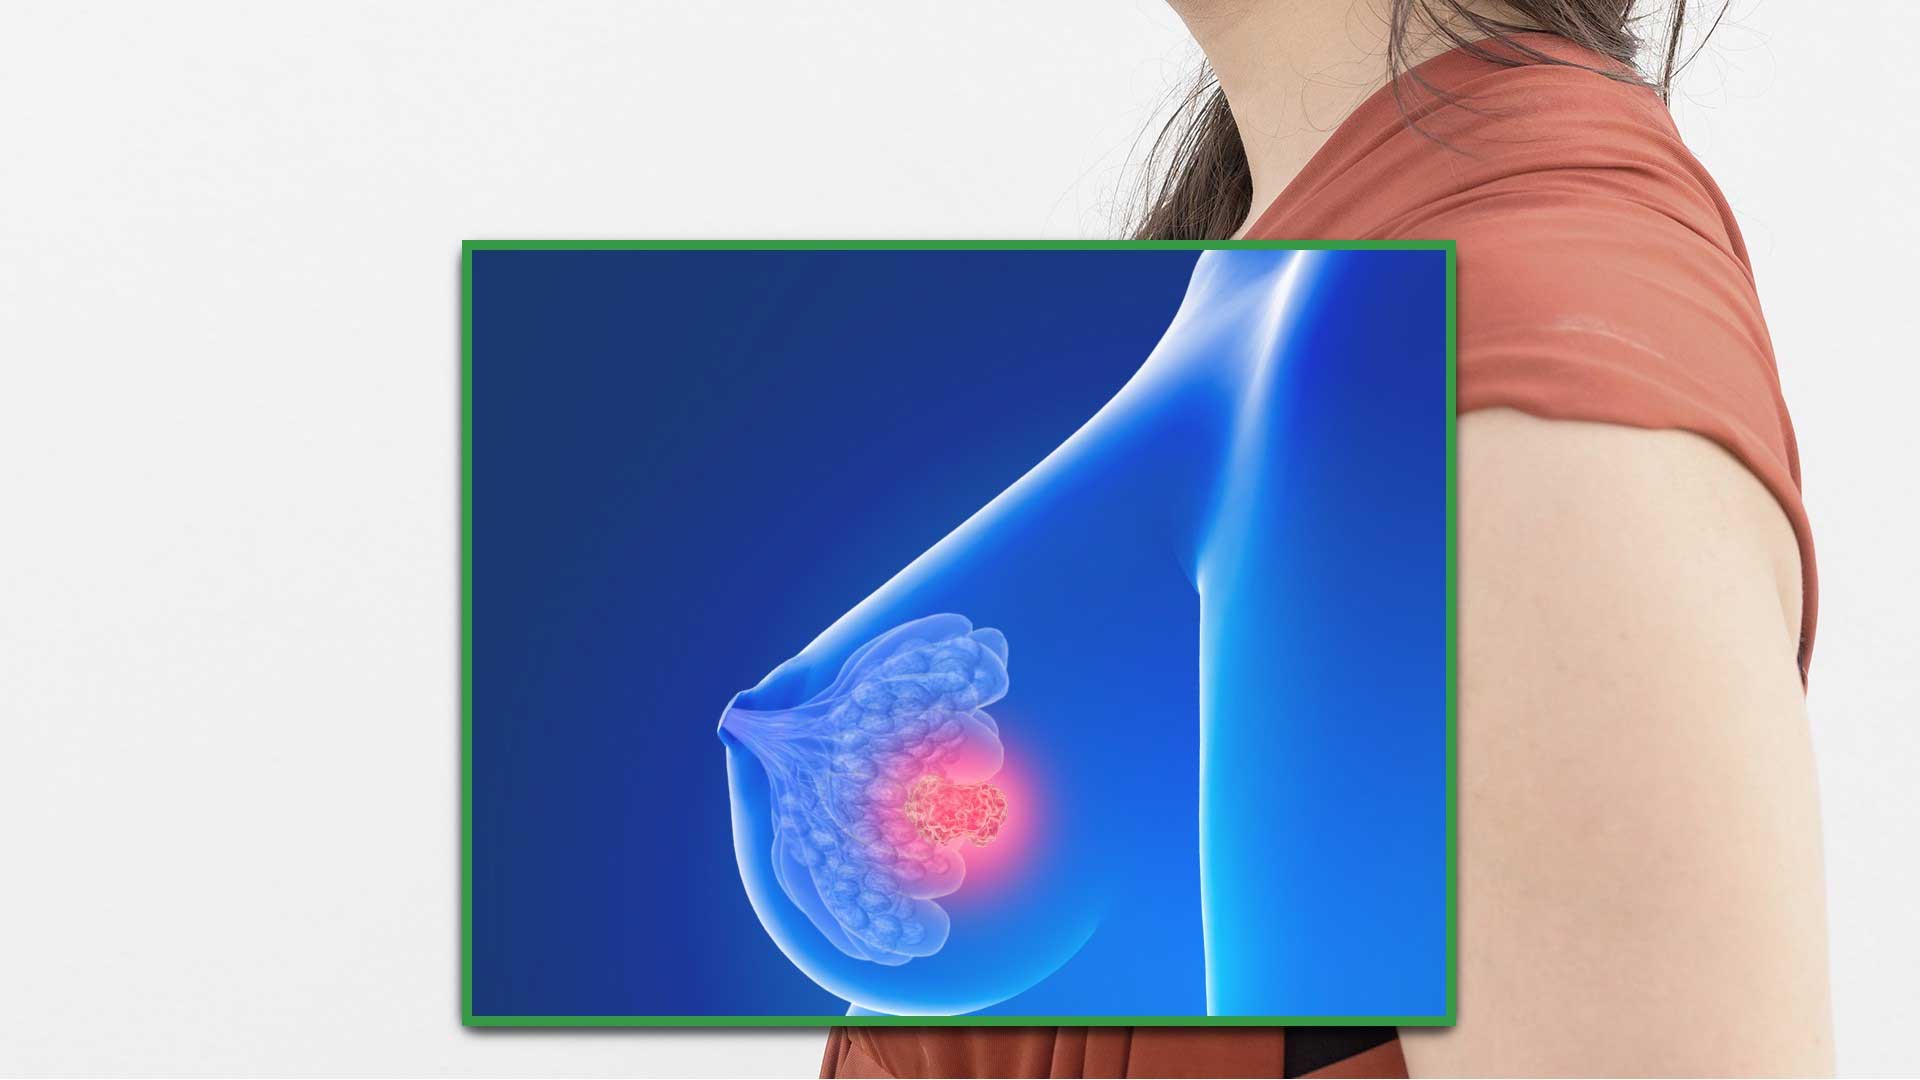 Case Study: Stage IV Breast Cancer Treatment With Metastatic Spread to the Bones